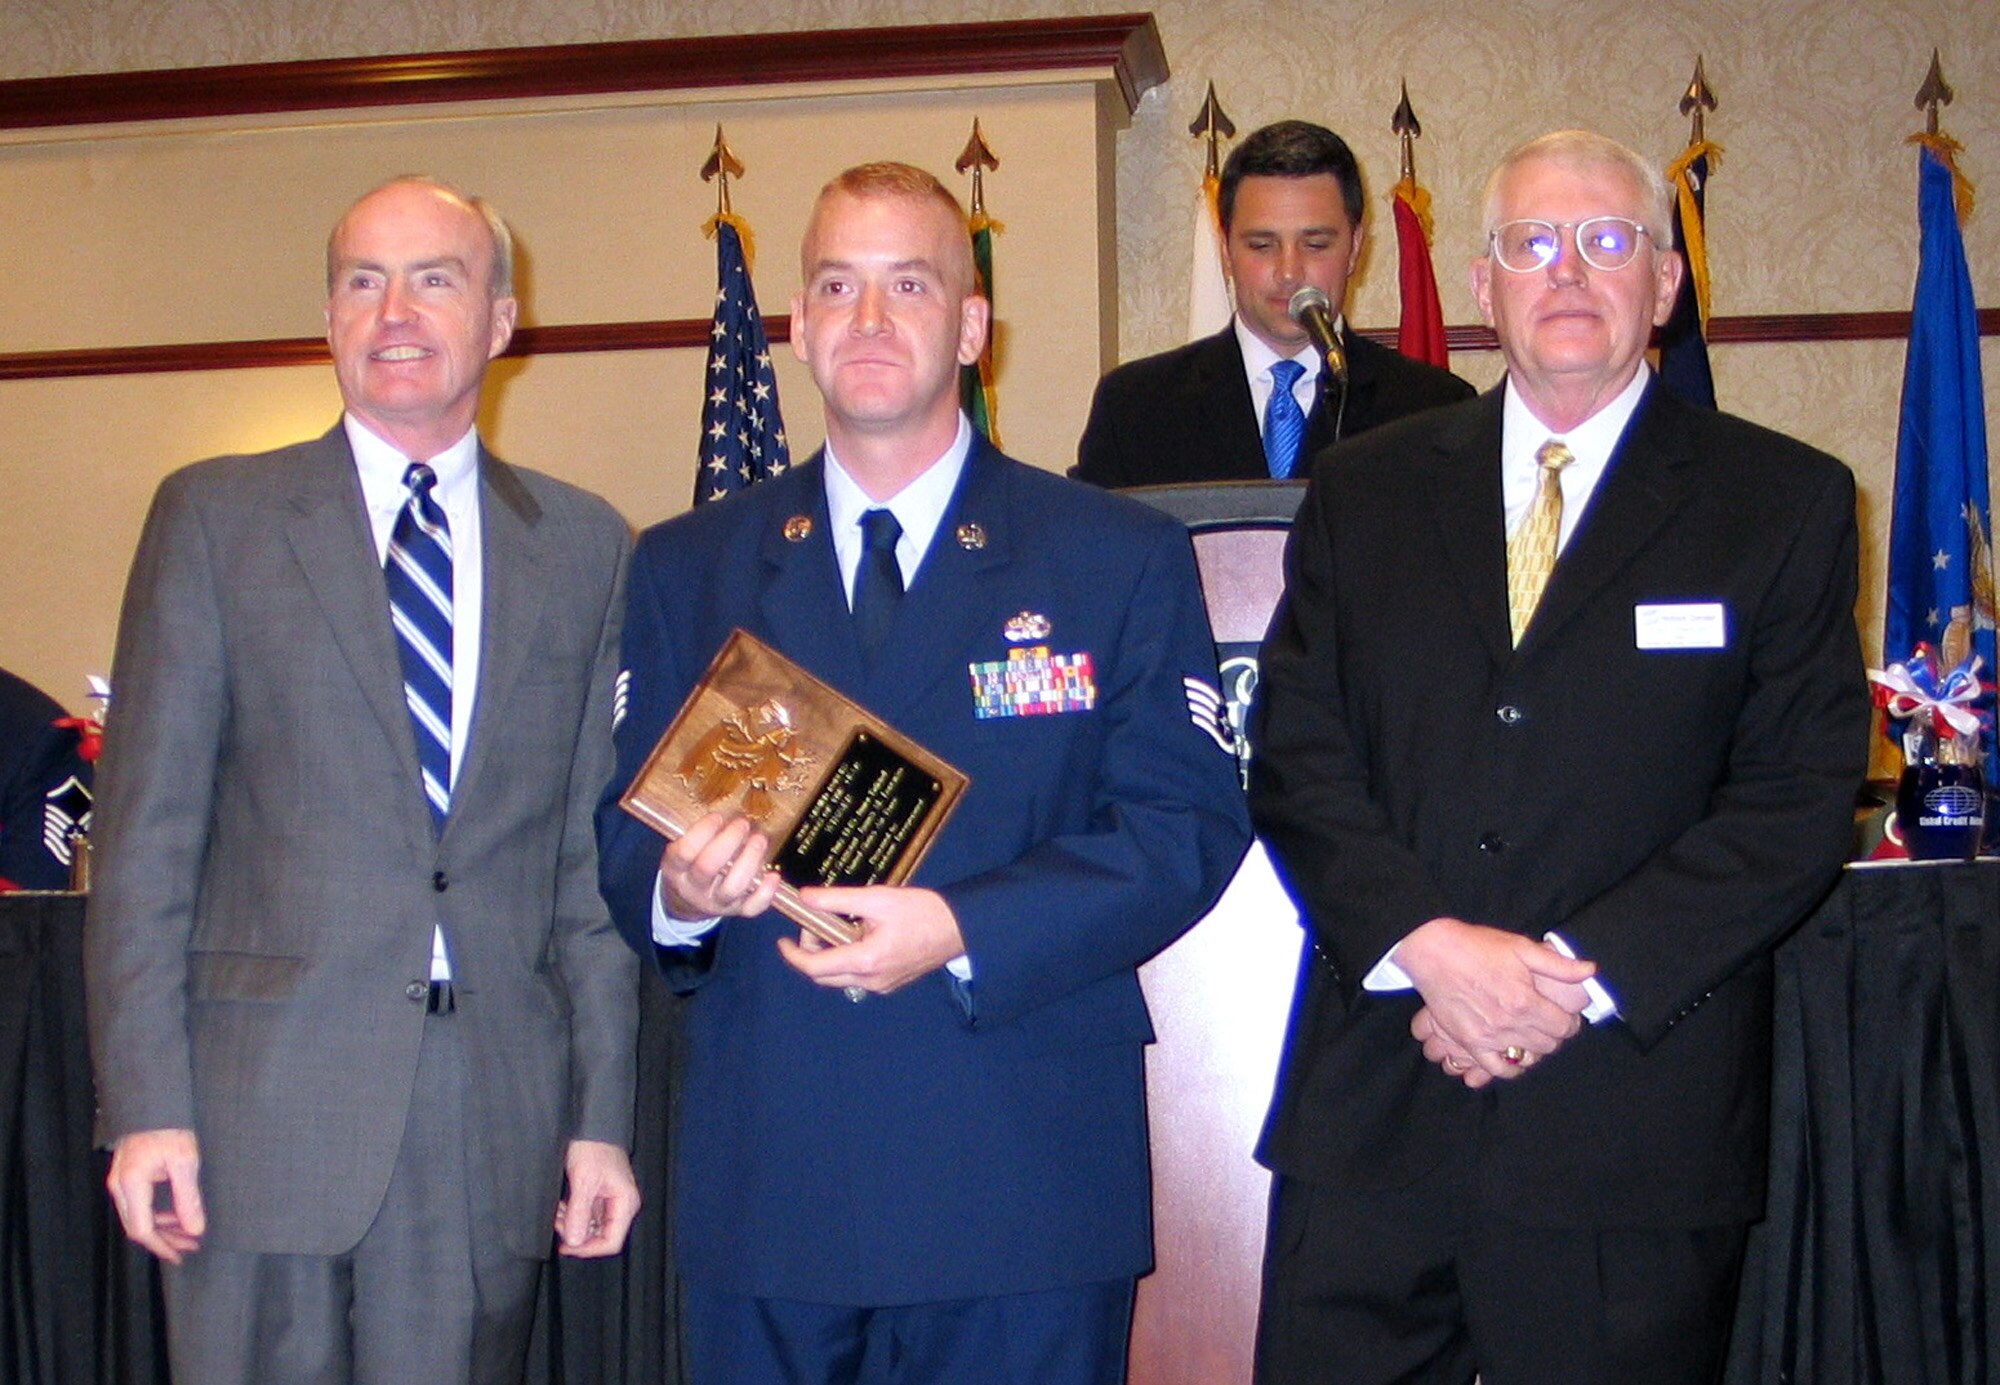 FAIRCHILD AIR FORCE BASE, Wash. -- Staff Sgt. James Lorenzo, 92nd Logistics Readiness Squadron, accepts his Person of the Year plaque from Spokane Mayor Dennis Hession (left) and Fred Zitterkopf, Armed Services Committee chairman, April 12 at the 51st Annual Armed Forces Persons of the Year banquet, hosted by Greater Spokane Incorporated. The award honors excellent servicemembers who excel in their community service efforts. (U.S. Air Force photo/Staff Sgt. Connie L. Bias) 
